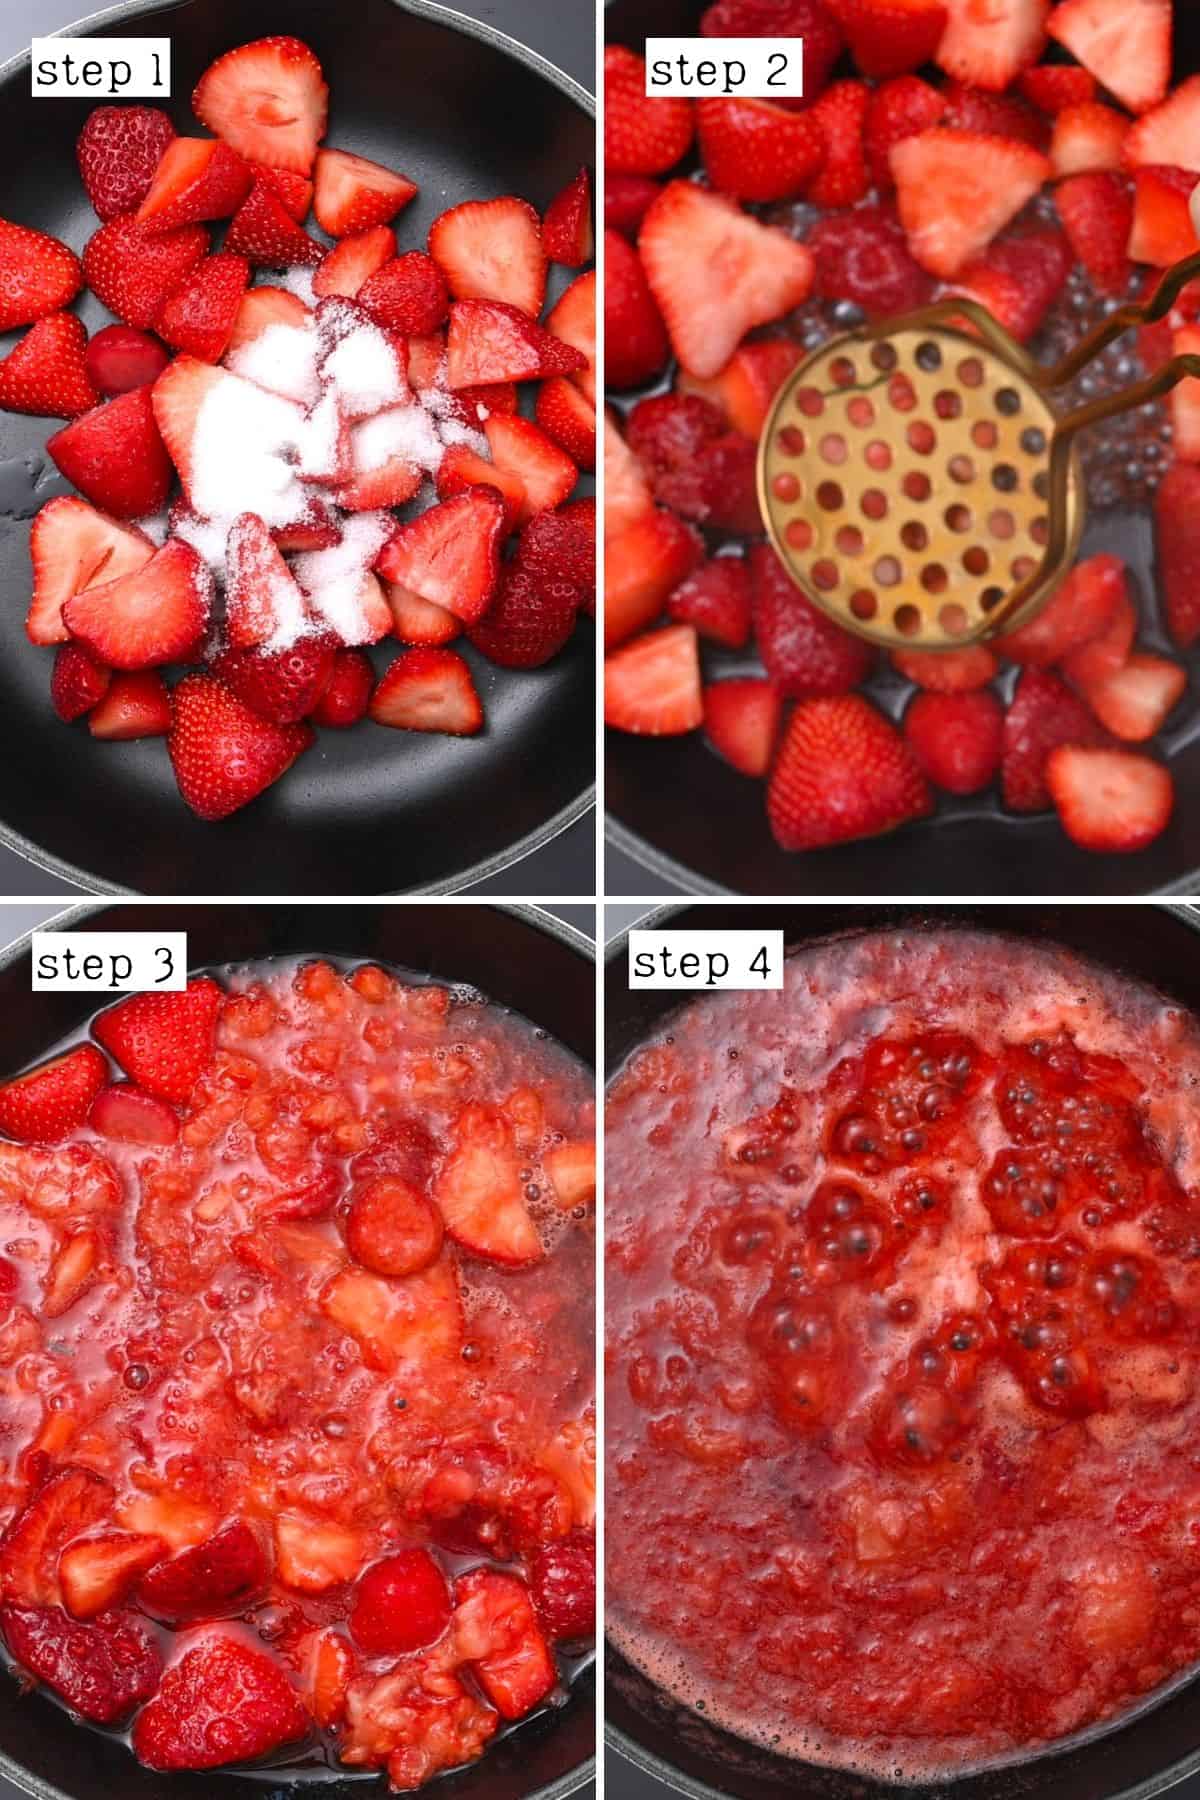 Steps for making strawberry compote